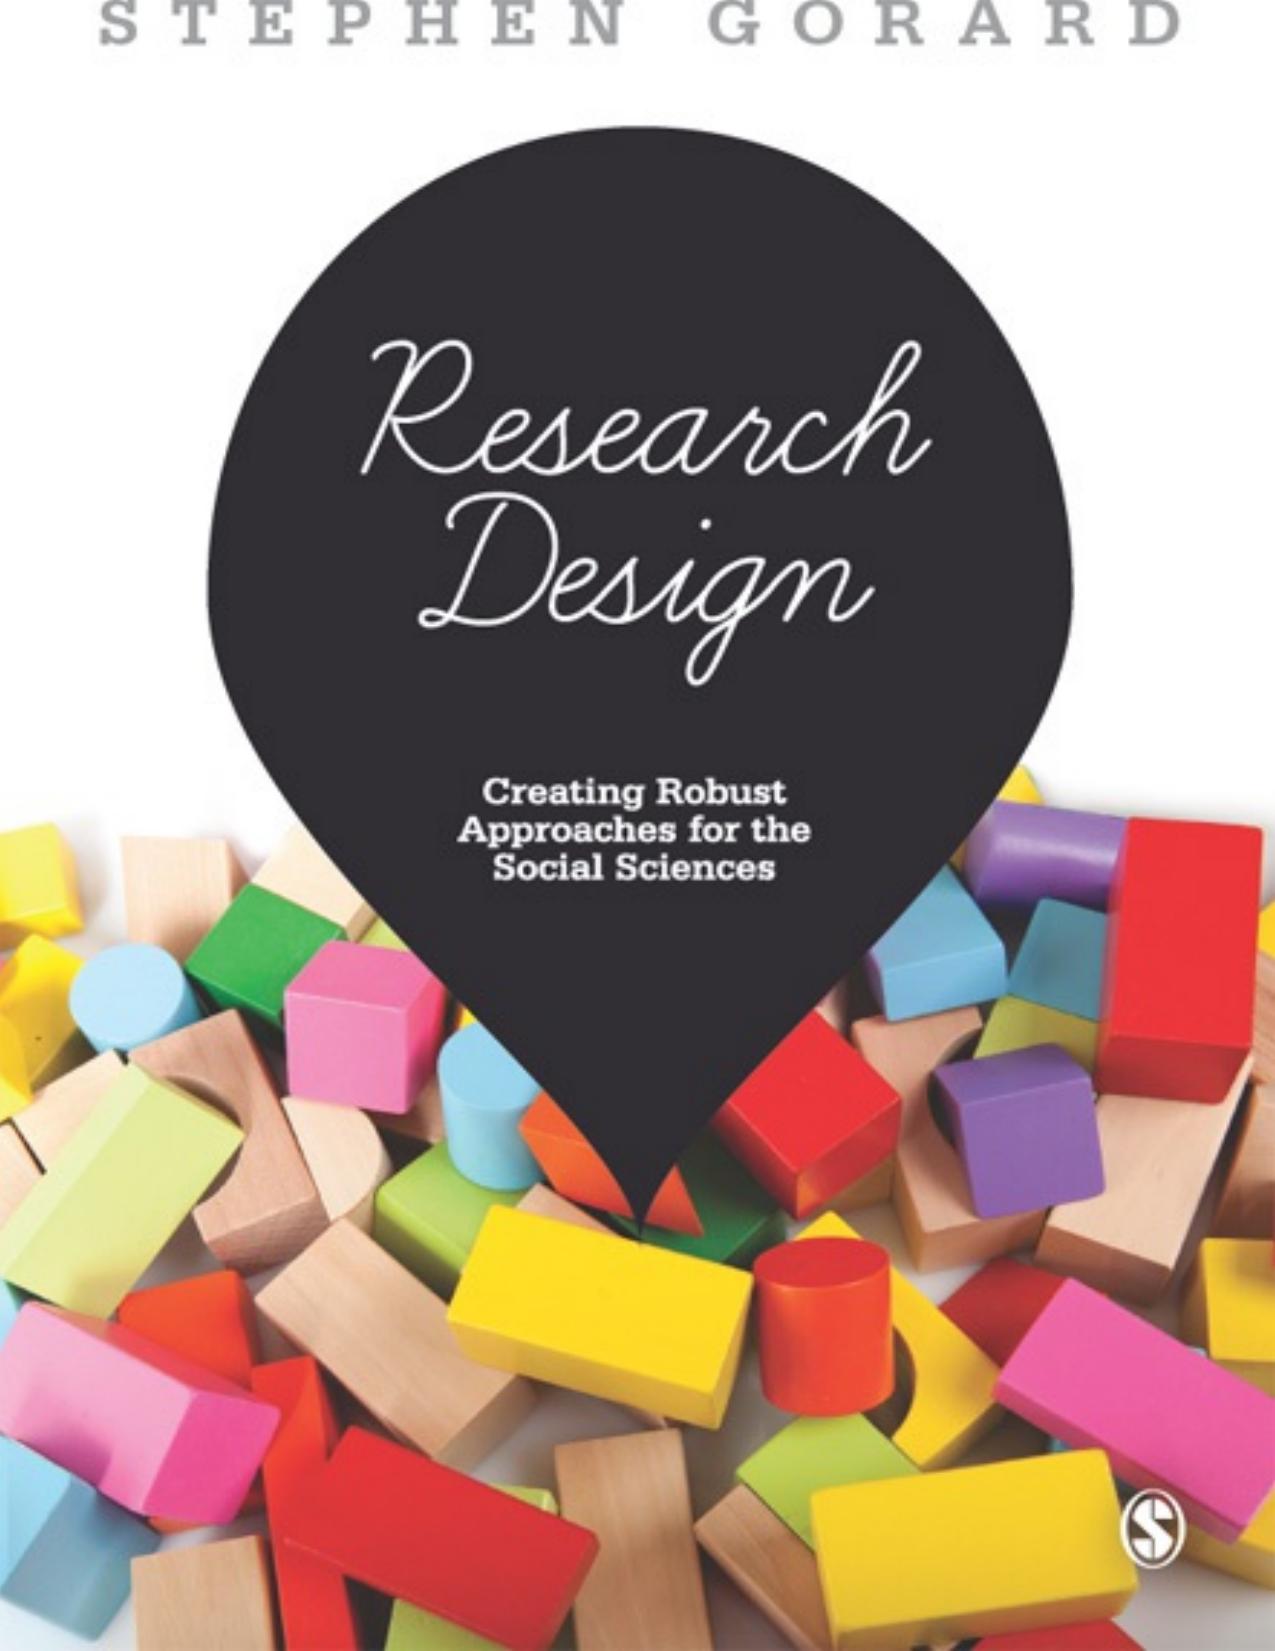 Research Design: Creating Robust Approaches for the Social Sciences 1st Edition by Stephen Gorard